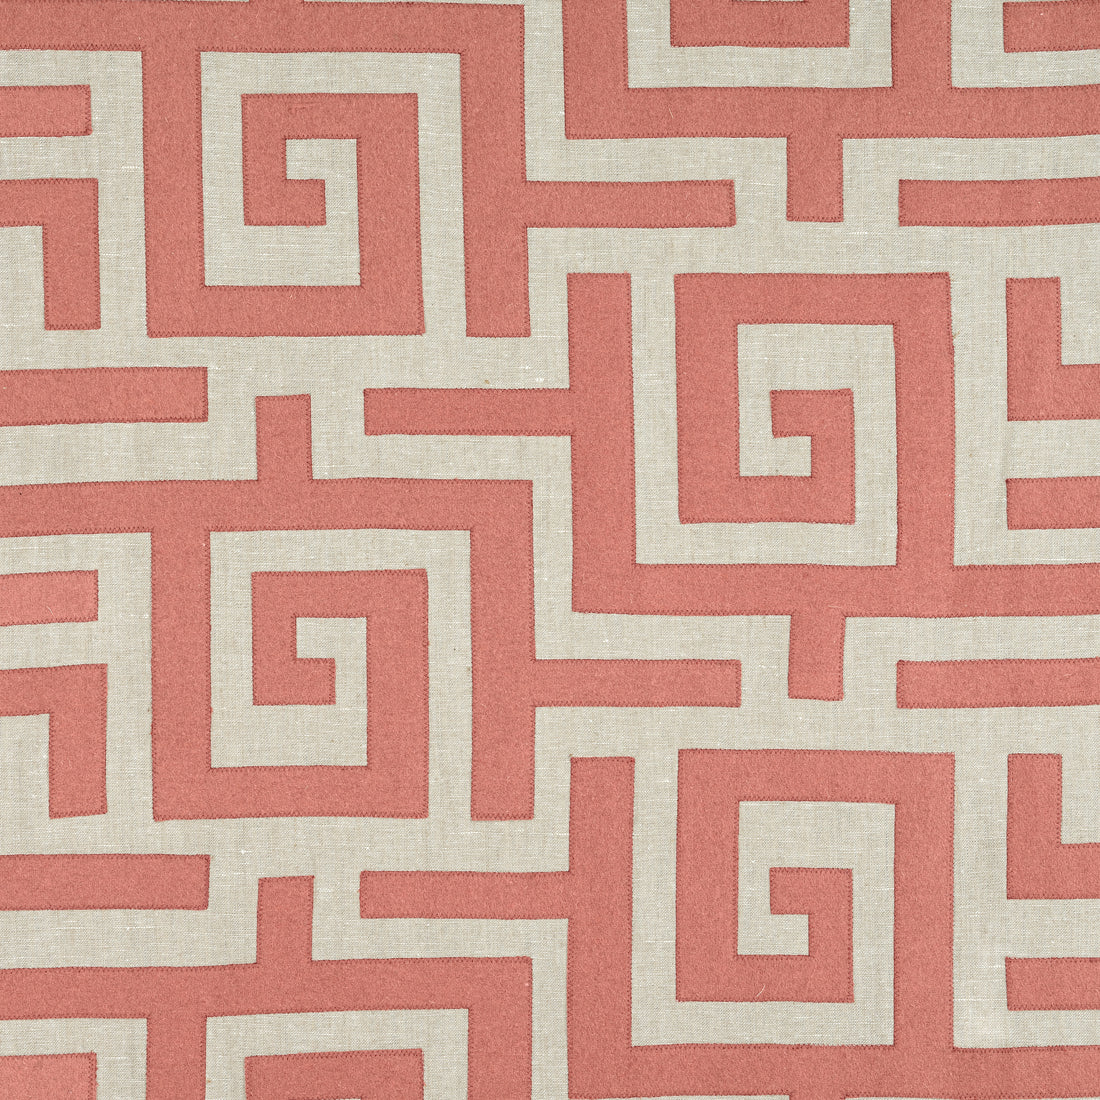 Tulum Applique fabric in coral on natural color - pattern number W713223 - by Thibaut in the Mesa collection